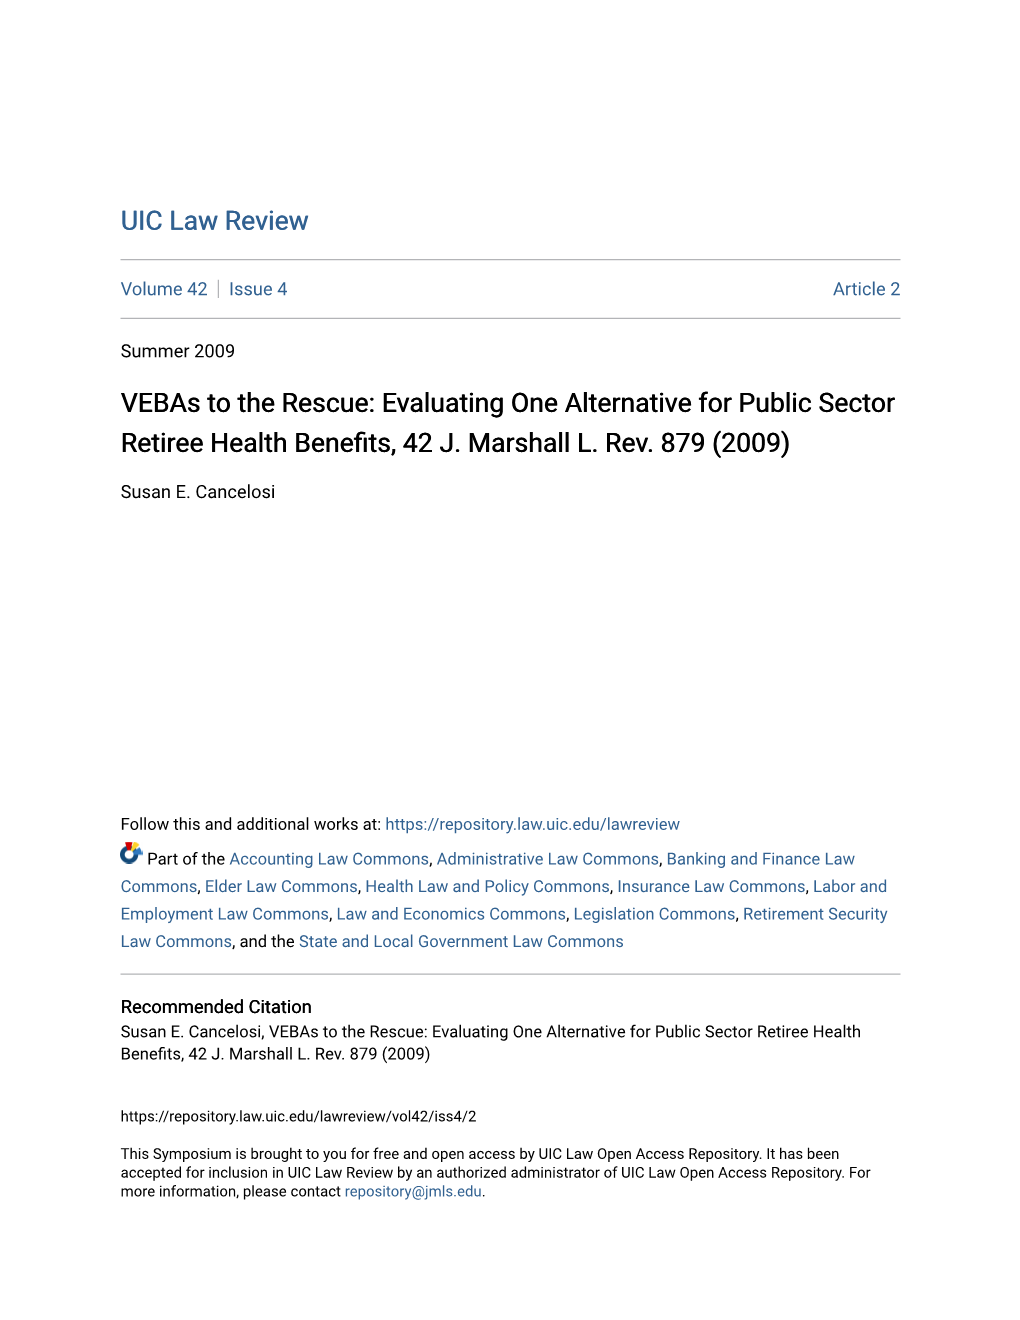 Vebas to the Rescue: Evaluating One Alternative for Public Sector Retiree Health Benefits, 42 J